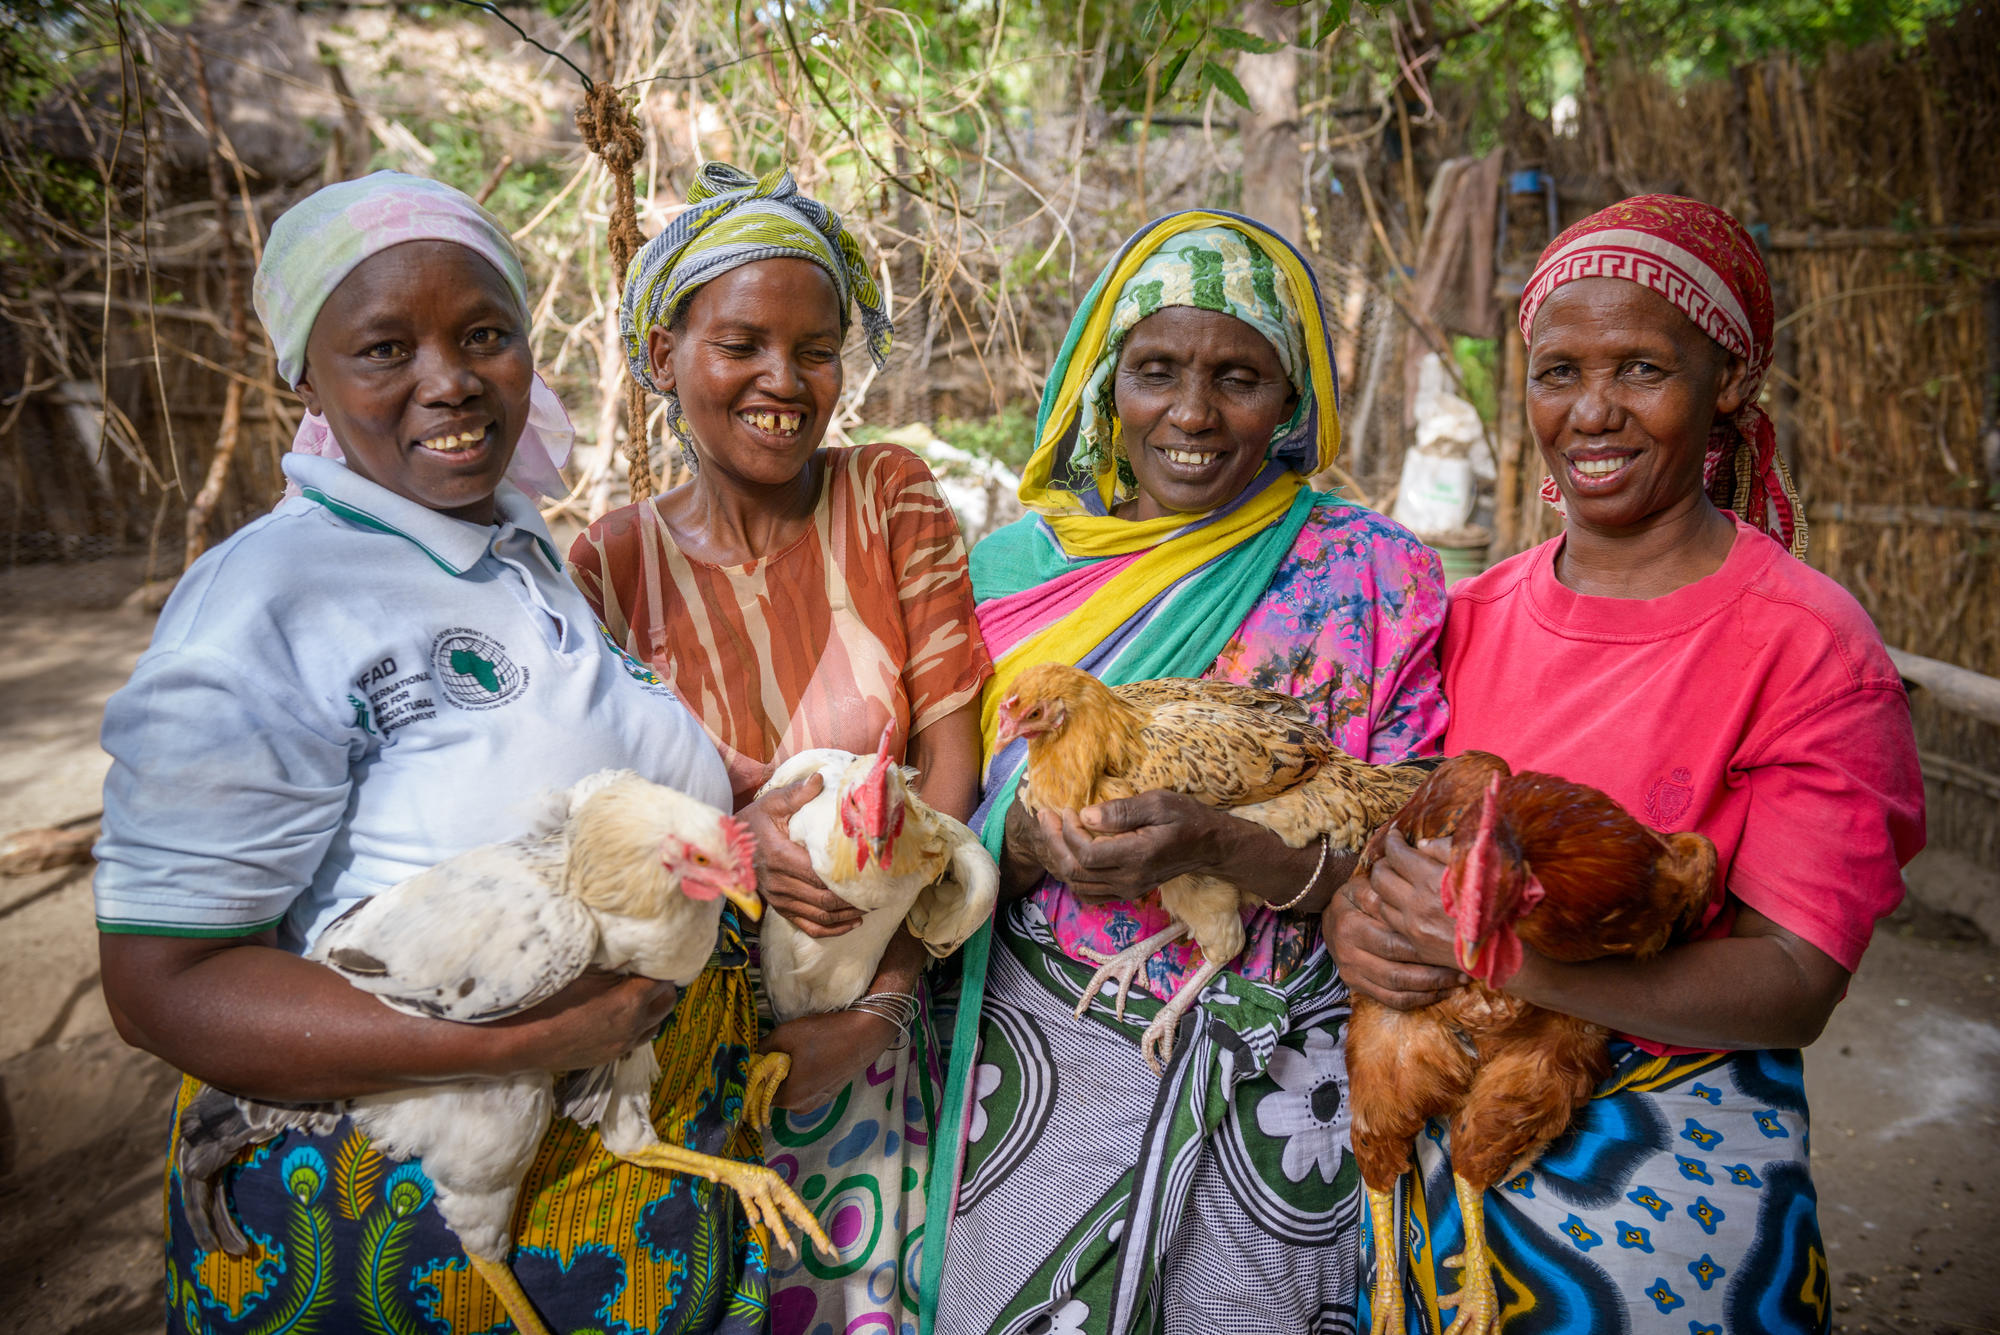 The "Wake up" Savings group that is raising chickens to provide for their families in Tanzania. 